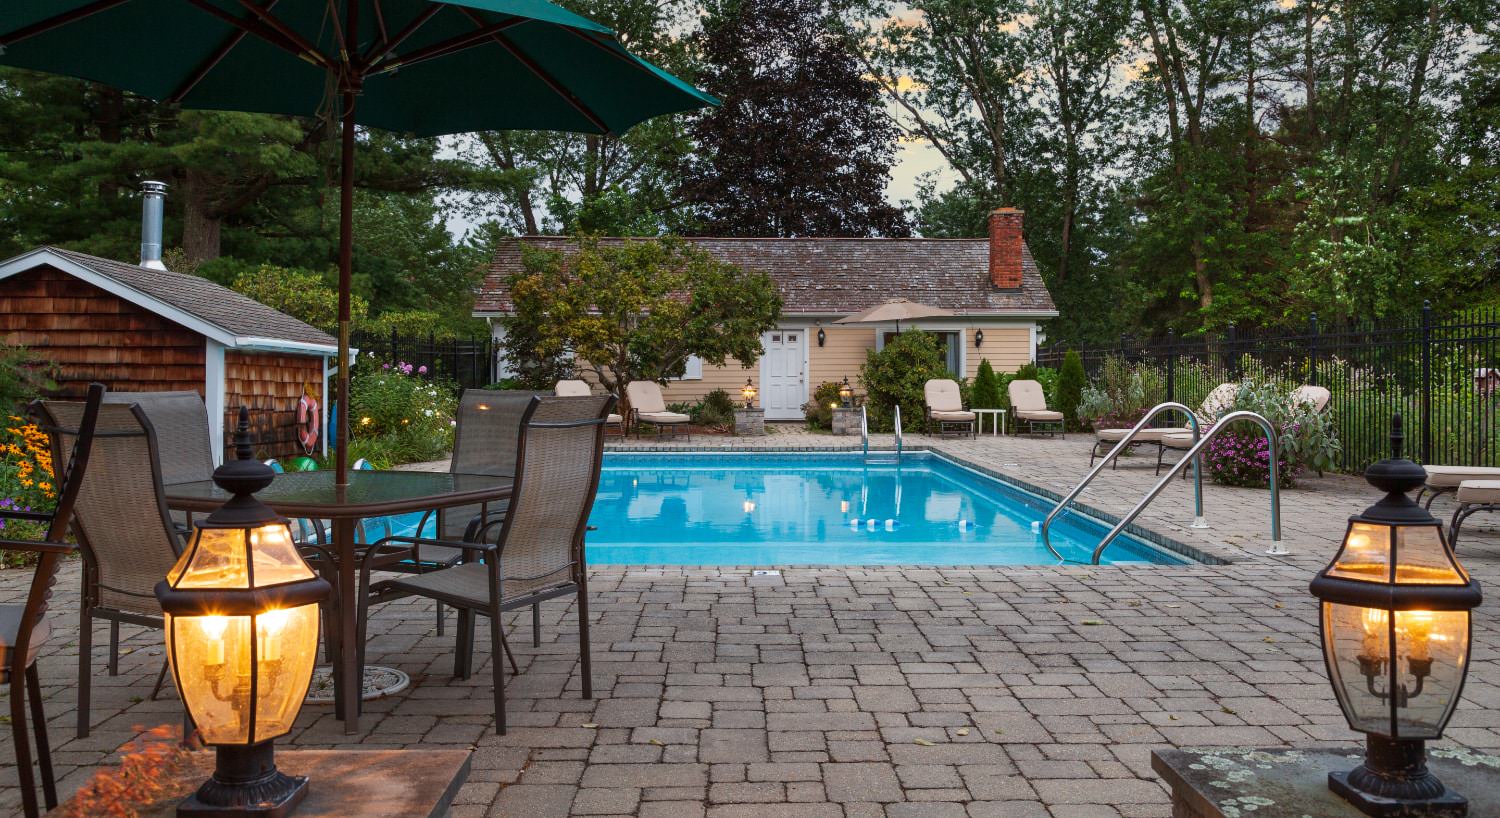 Pool area surrounded by brick patio with patio table and chairs, green umbrella, black wrought-iron fencing, large treen trees, and a lot of bushes and shrubs